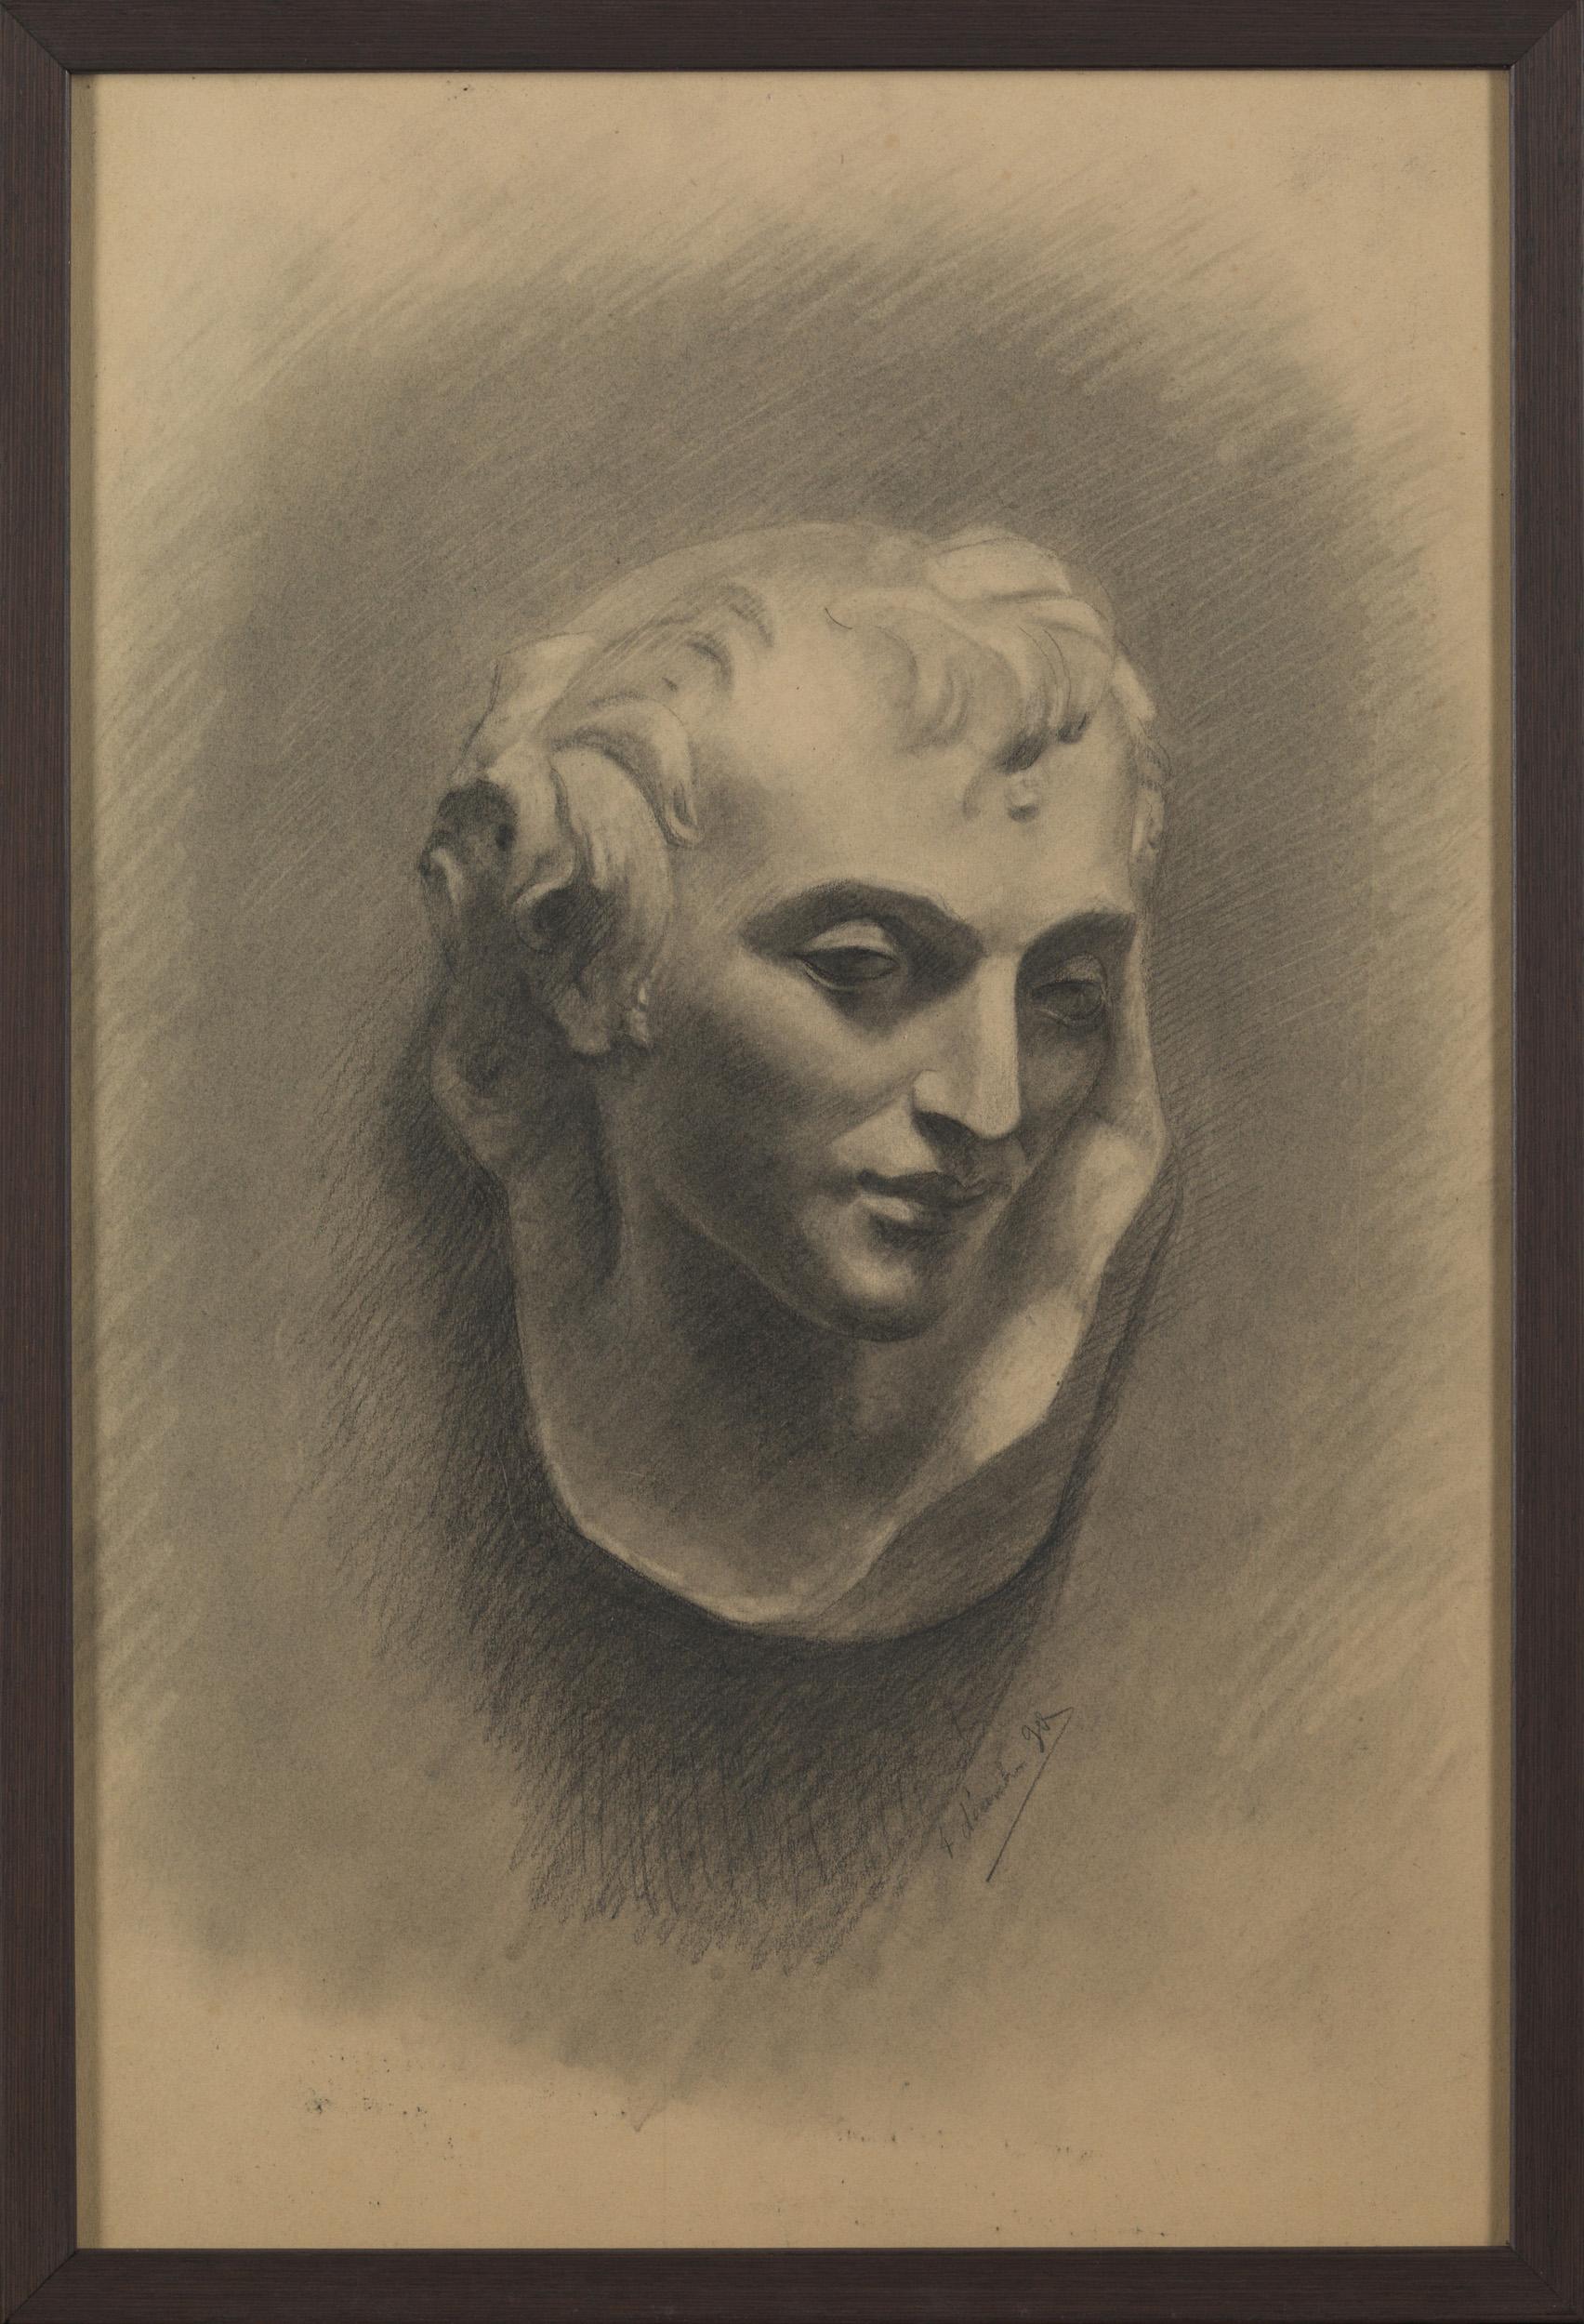 Hand-Crafted Portrait of a Woman, Drawing, Pencil on Paper, Framed and Signed